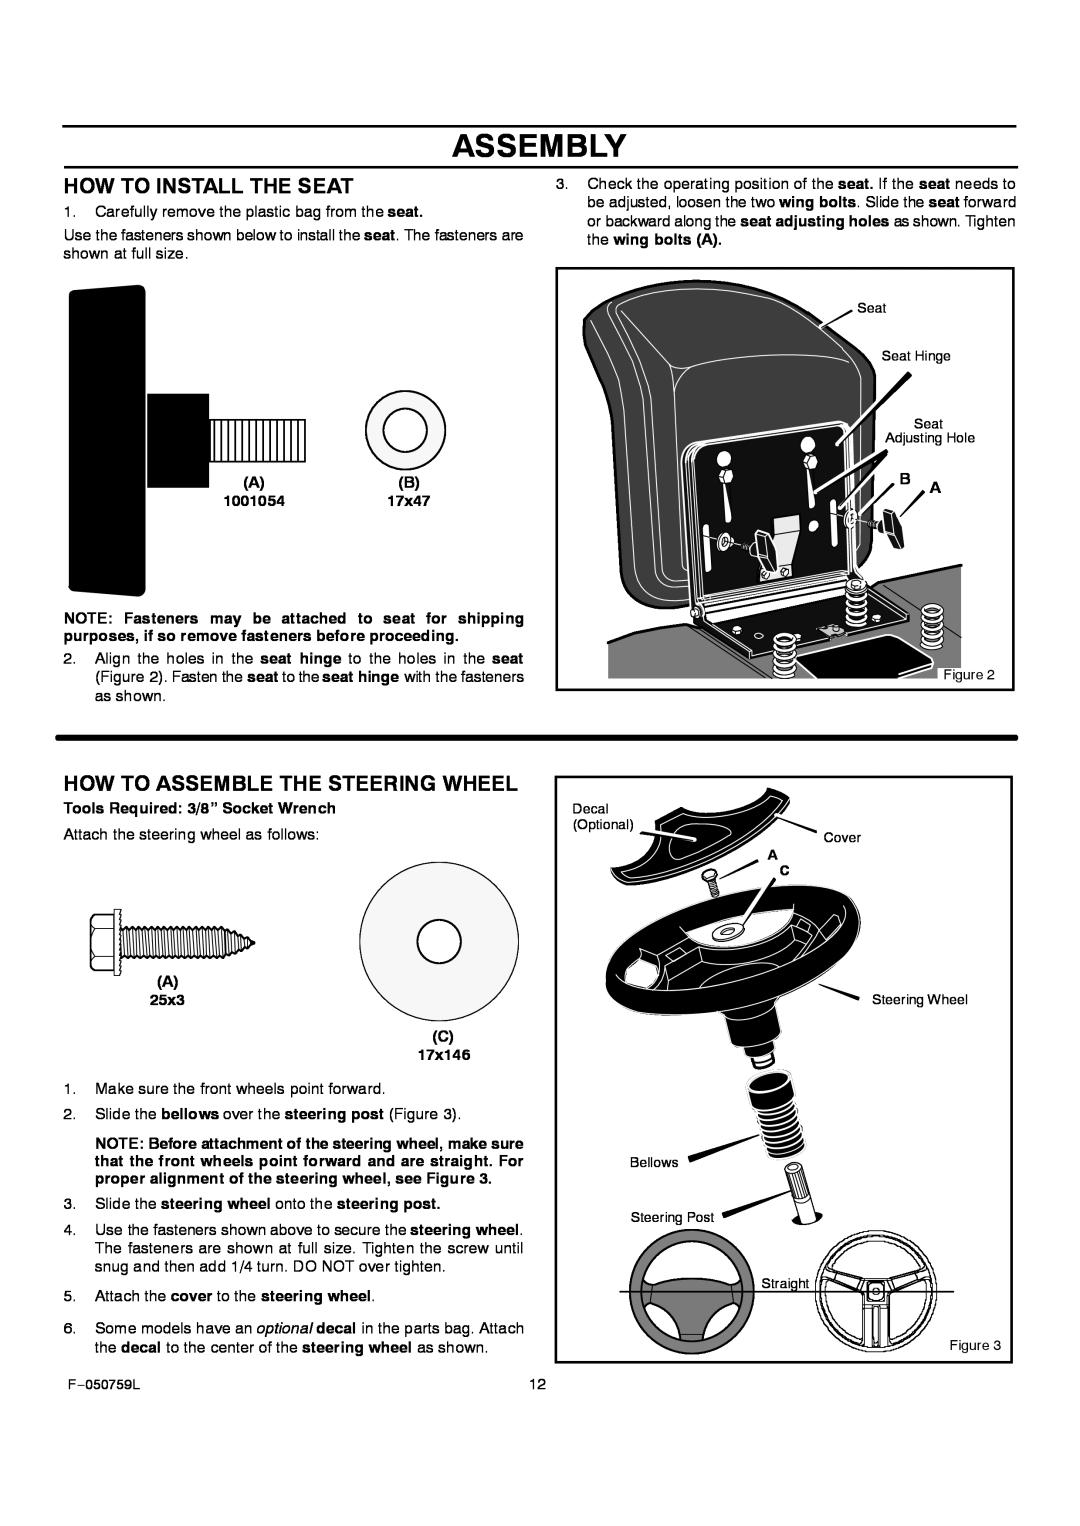 Rover 405012x108A owner manual How To Install The Seat, How To Assemble The Steering Wheel, Assembly 